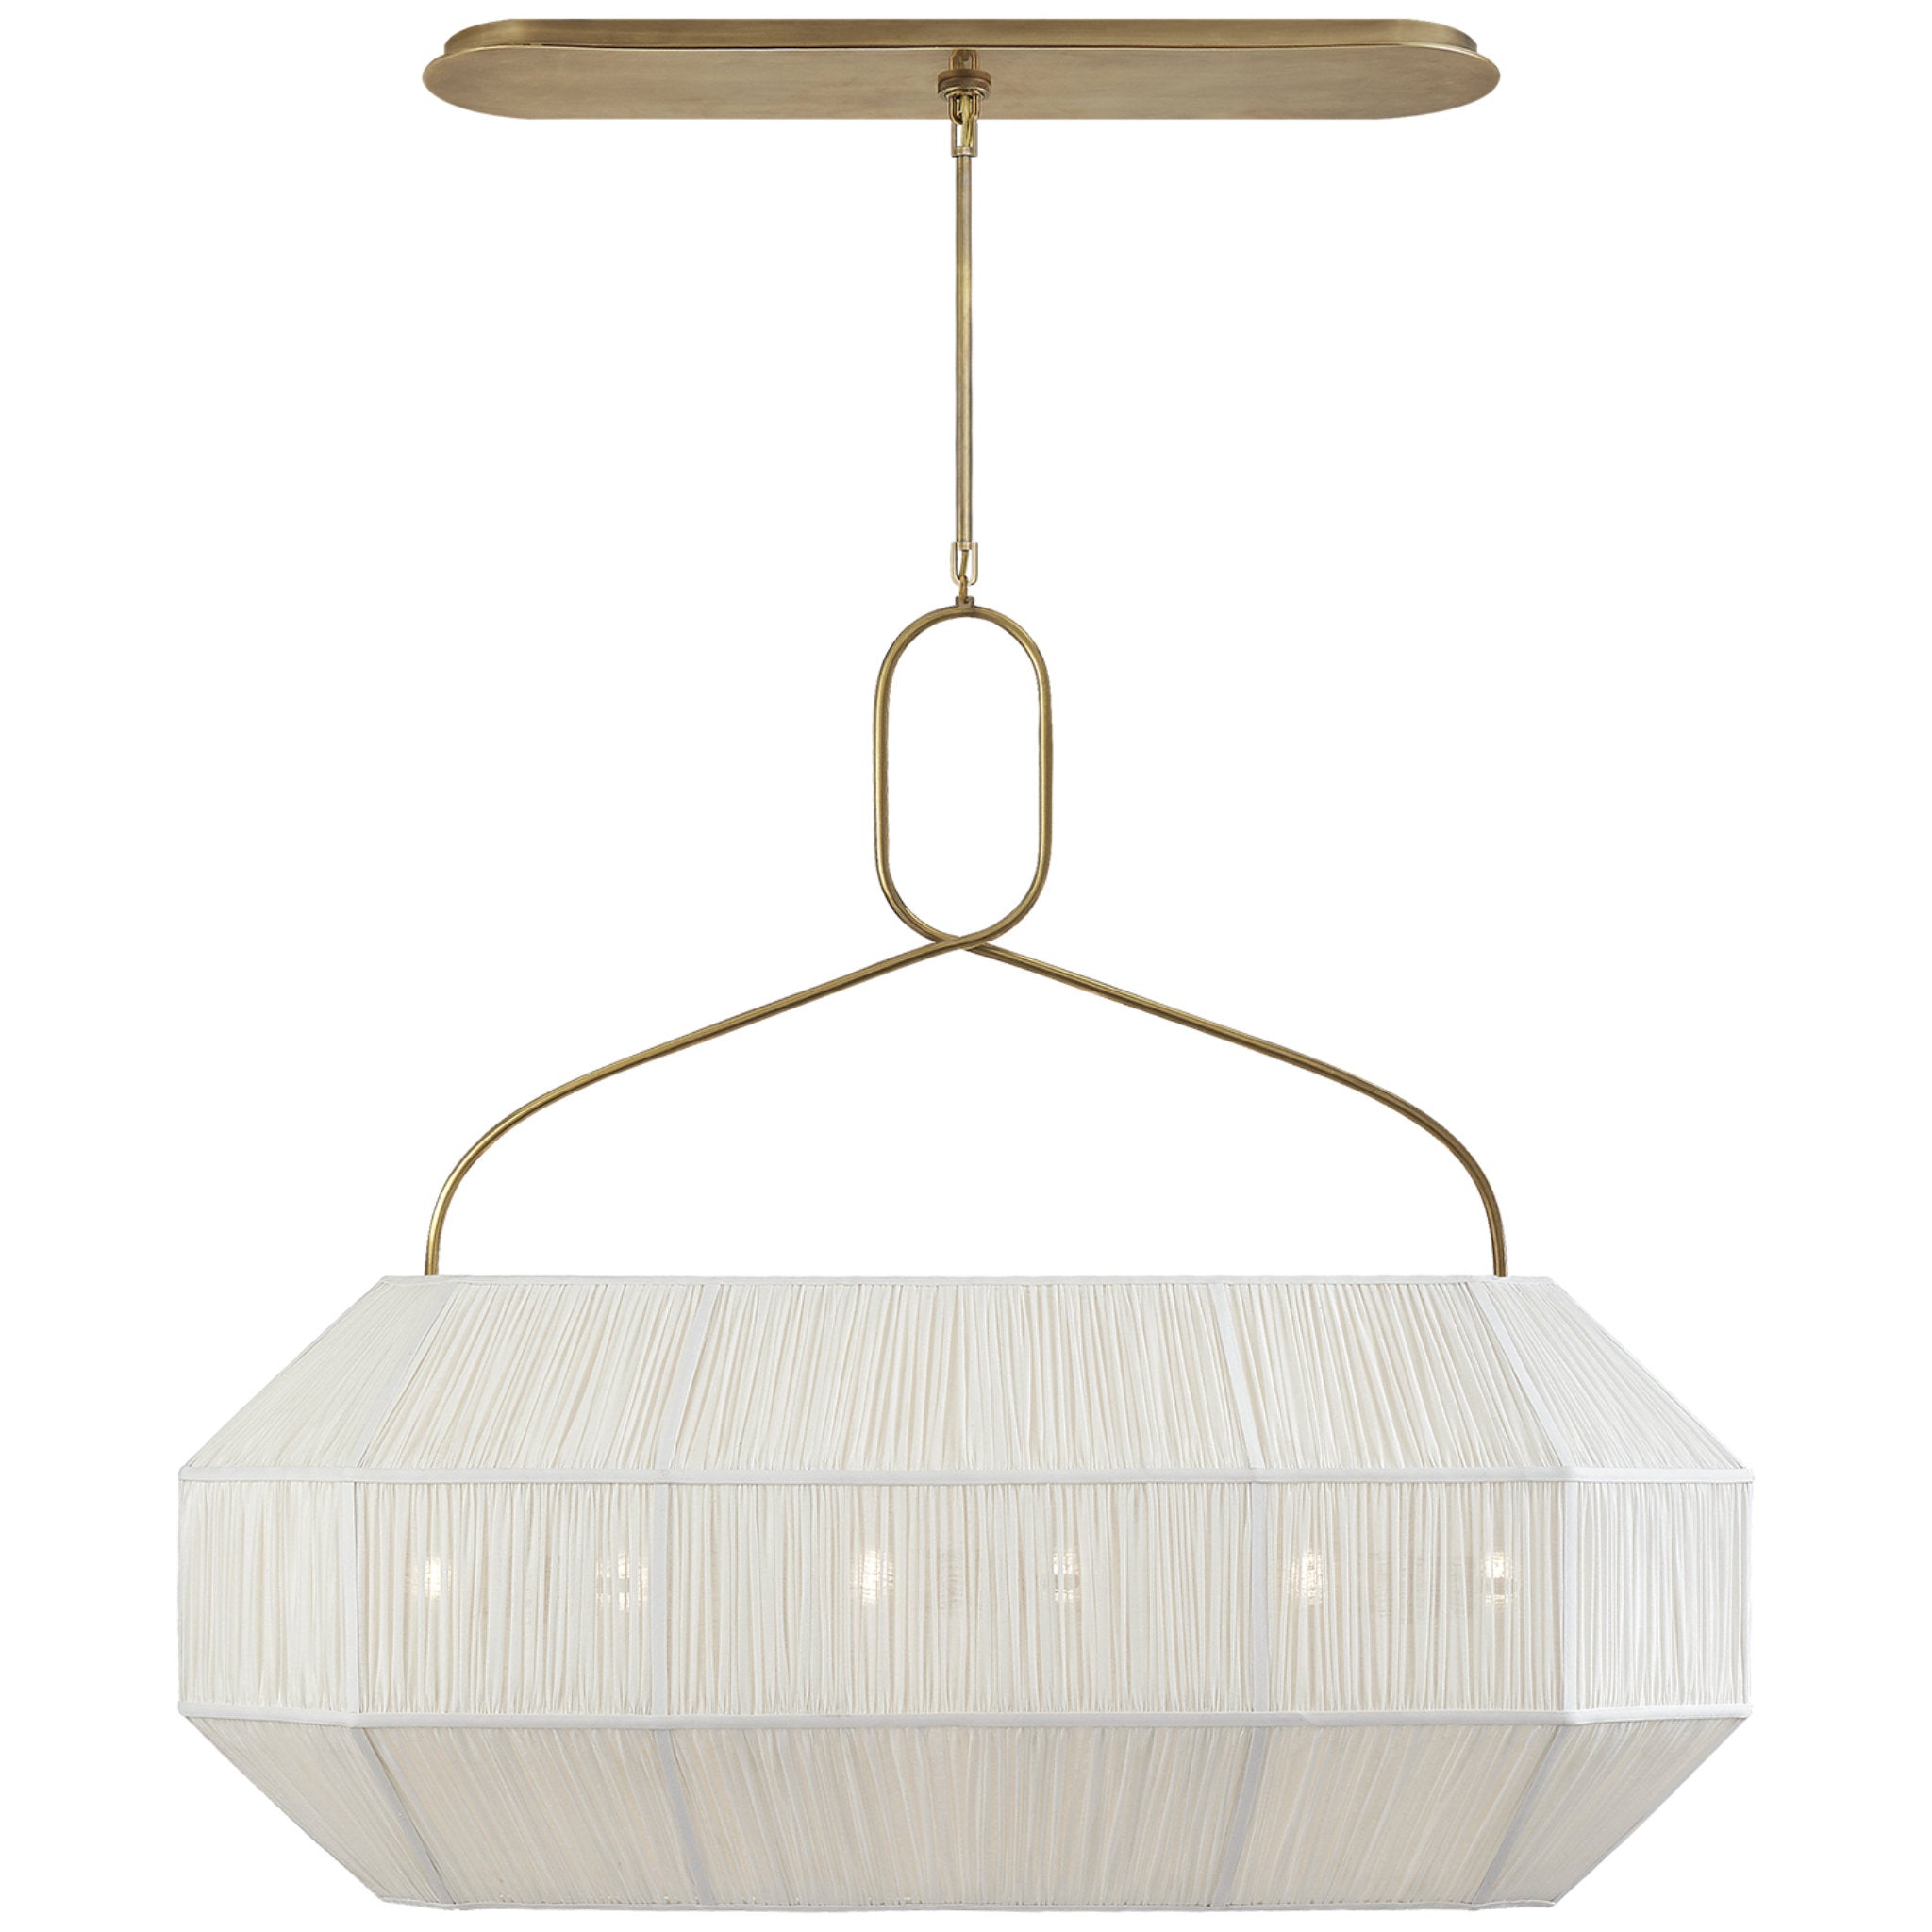 Kelly Wearstler Forza Medium Linear Lantern in Antique-Burnished Brass with Gathered Linen Shade